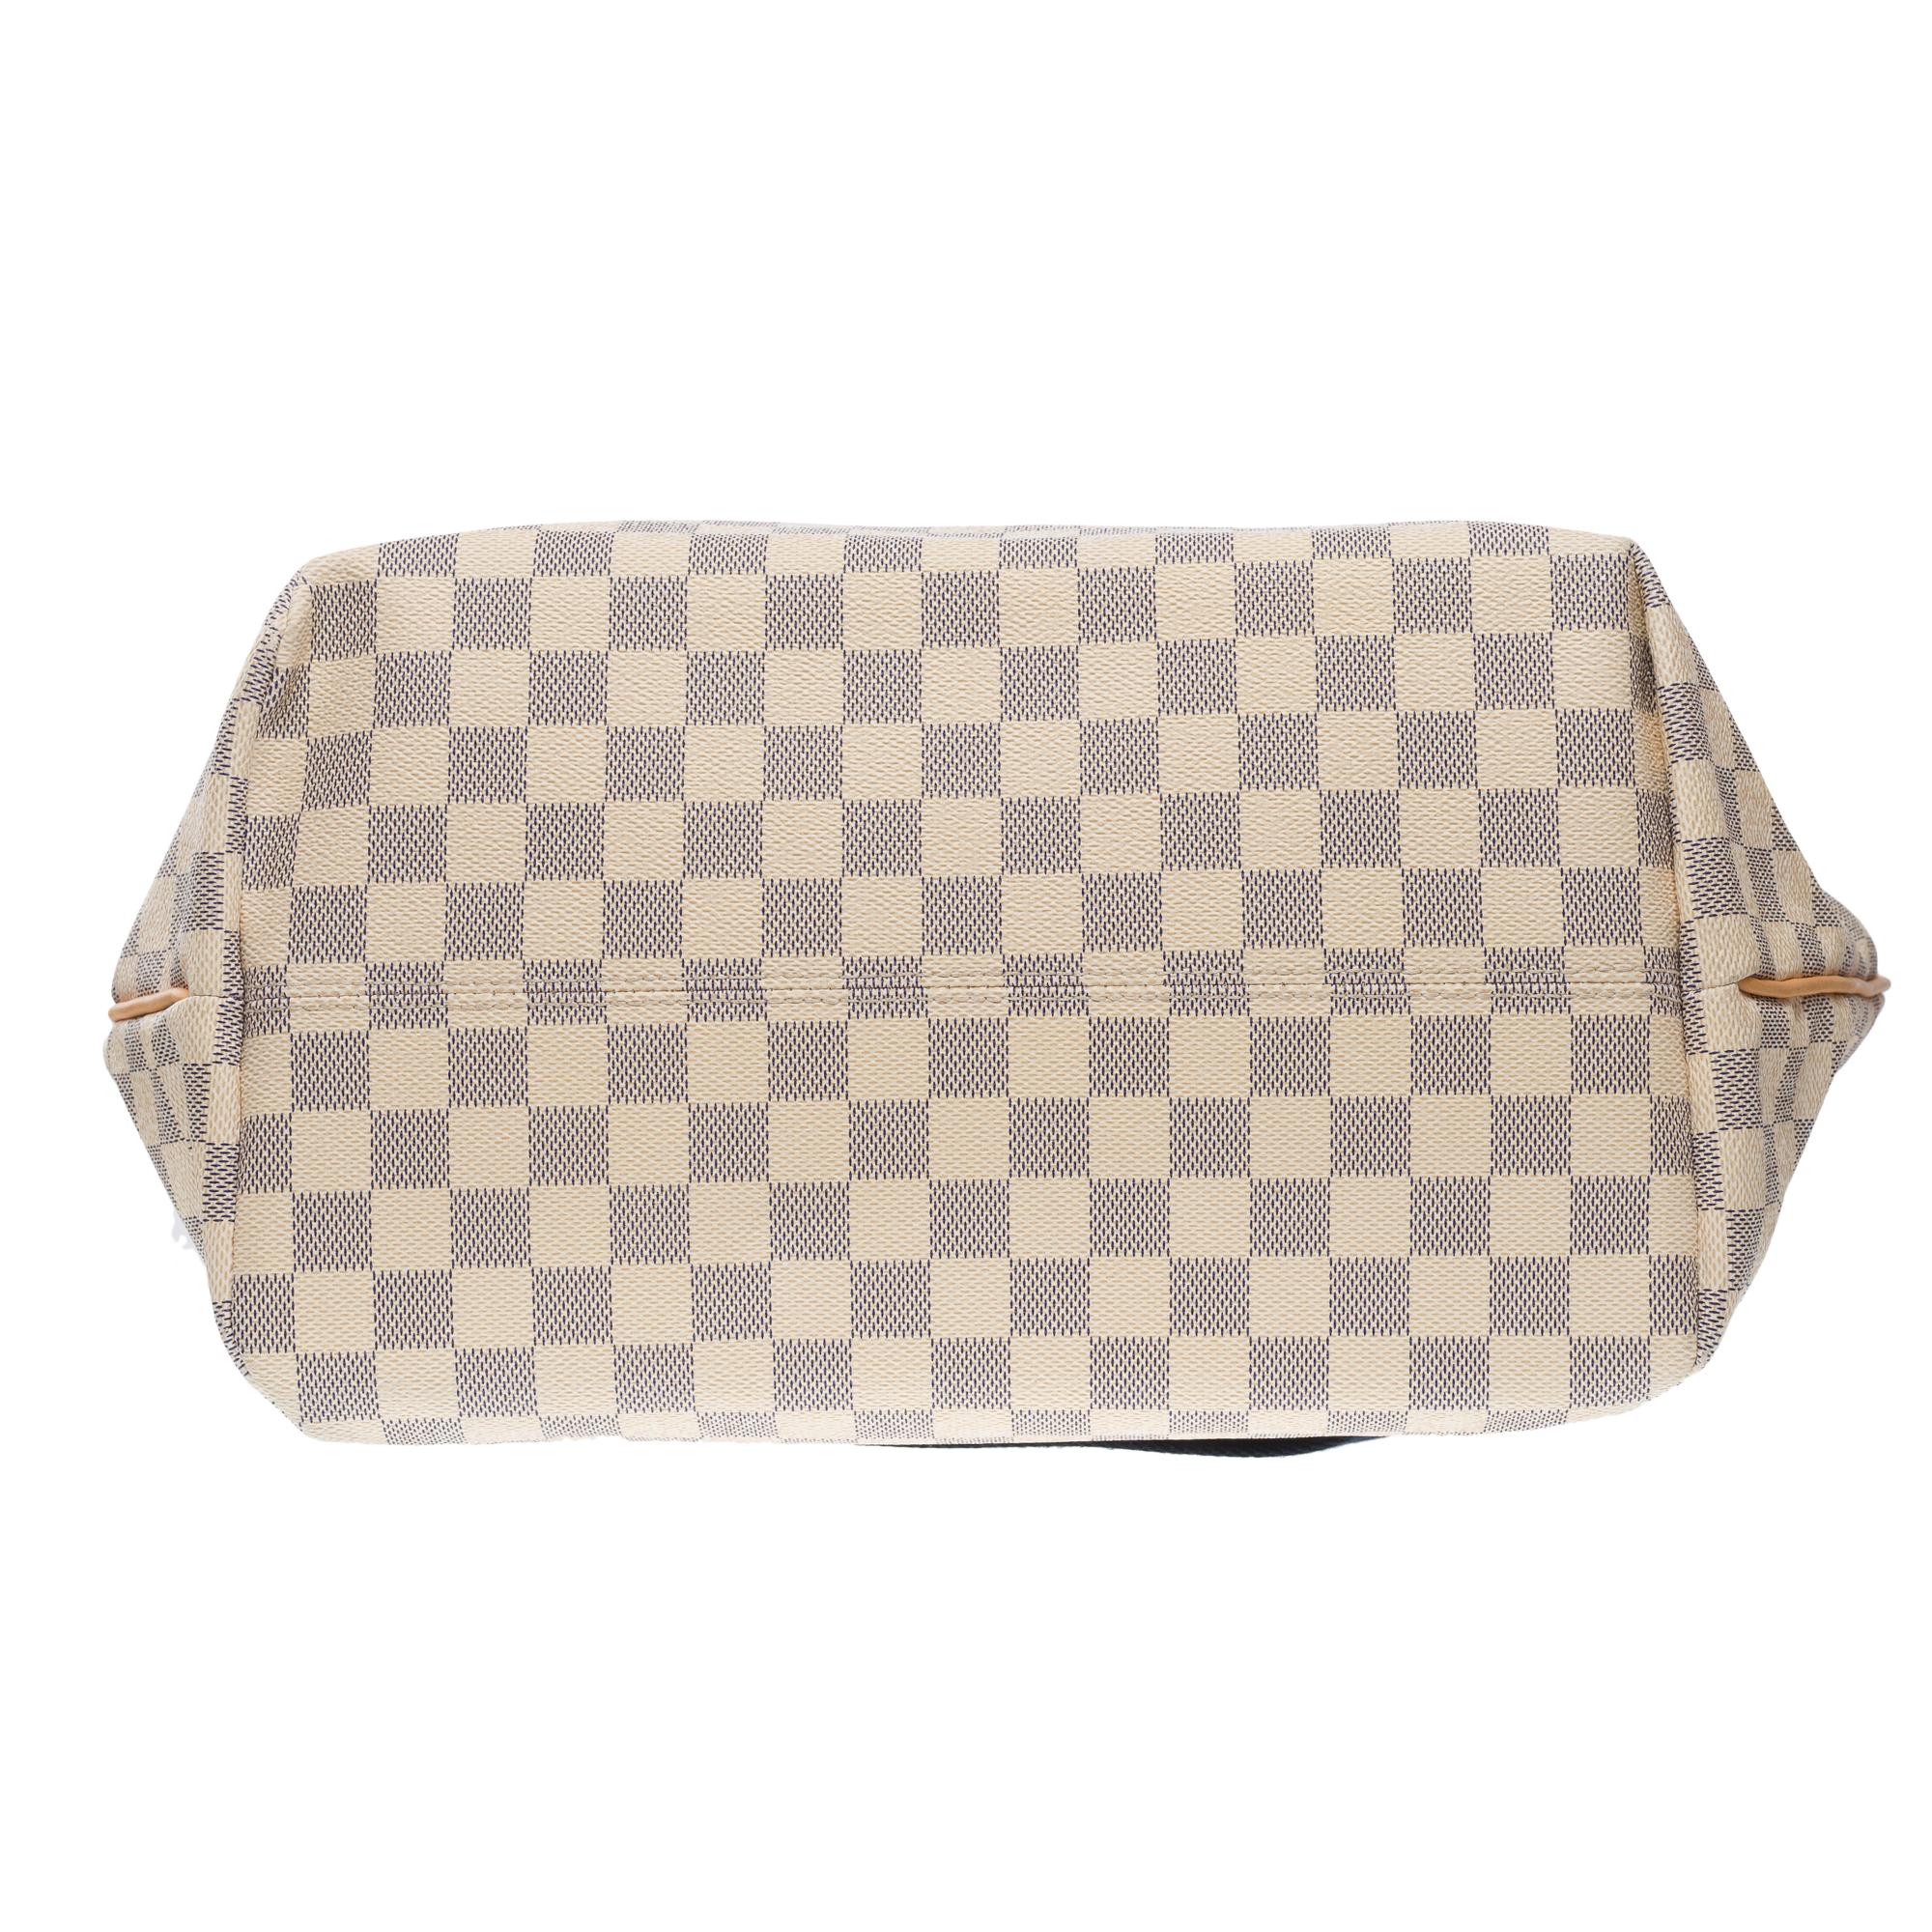 Amazing Louis Vuitton Tote bag in azur checkered canvas, GHW For Sale 7